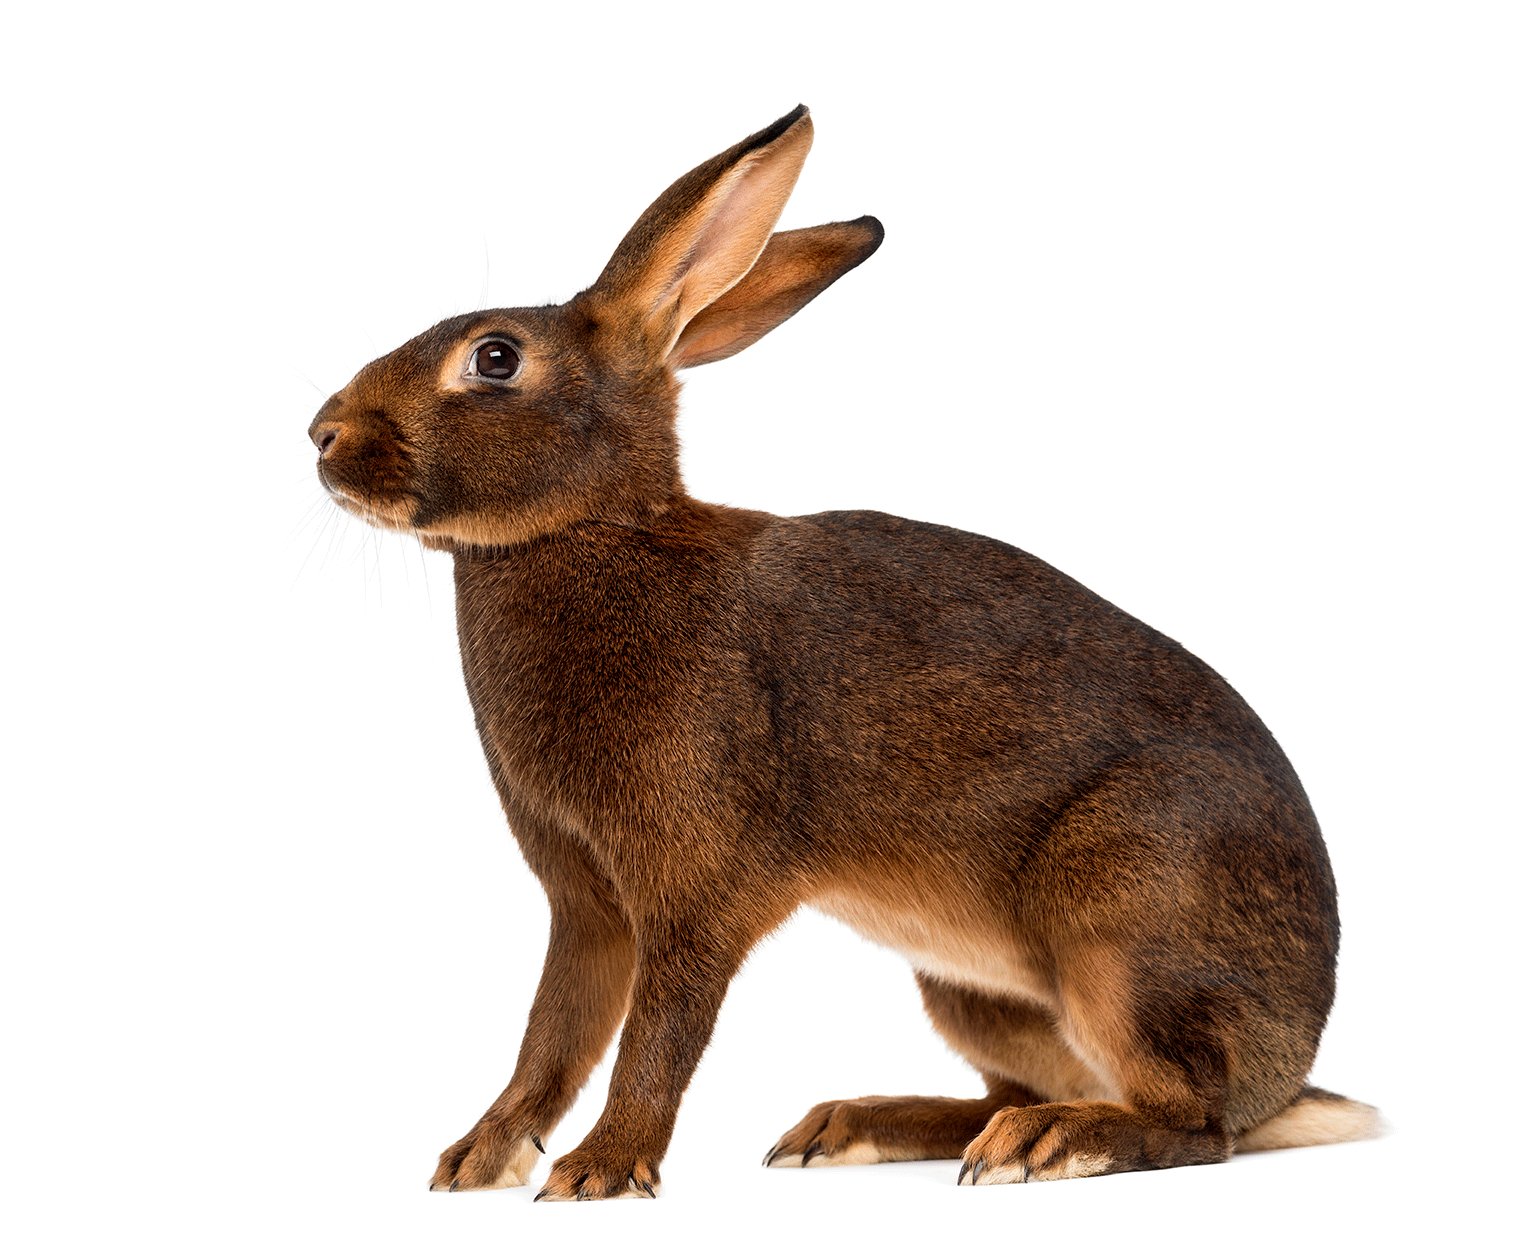 A side view of a rabbit.